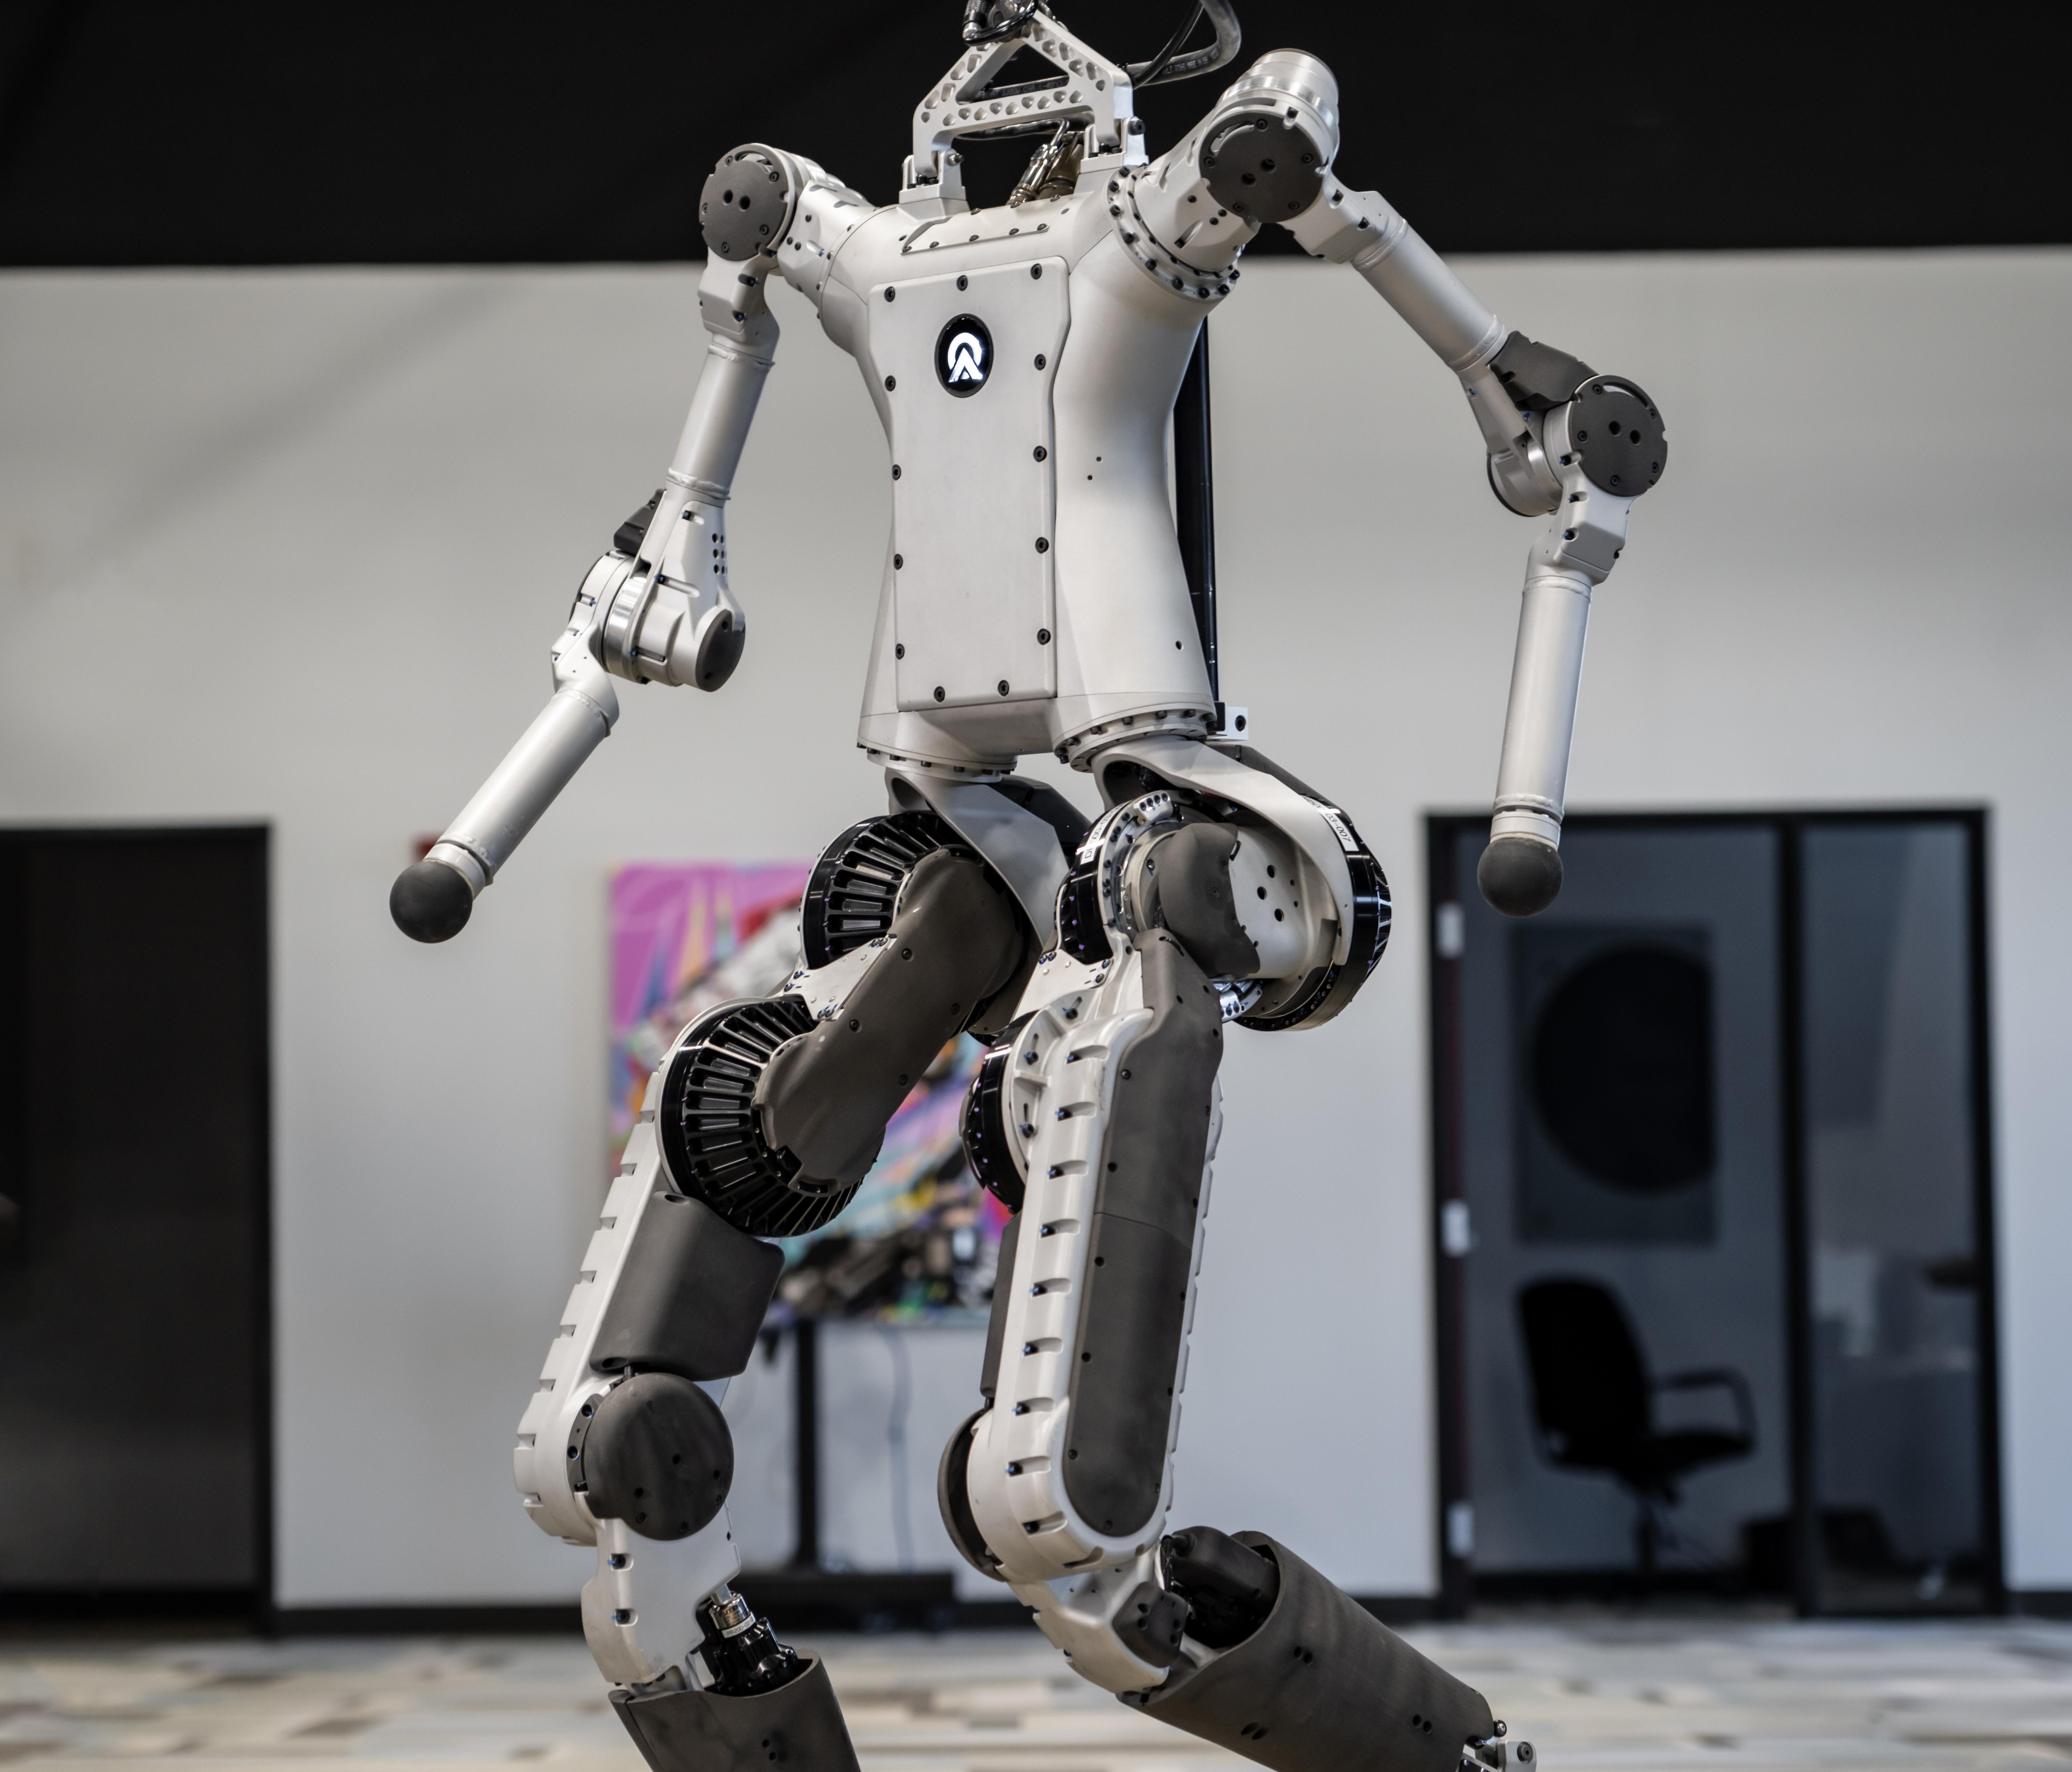 Watch Every Prototype to Make a Humanoid Robot, Currents